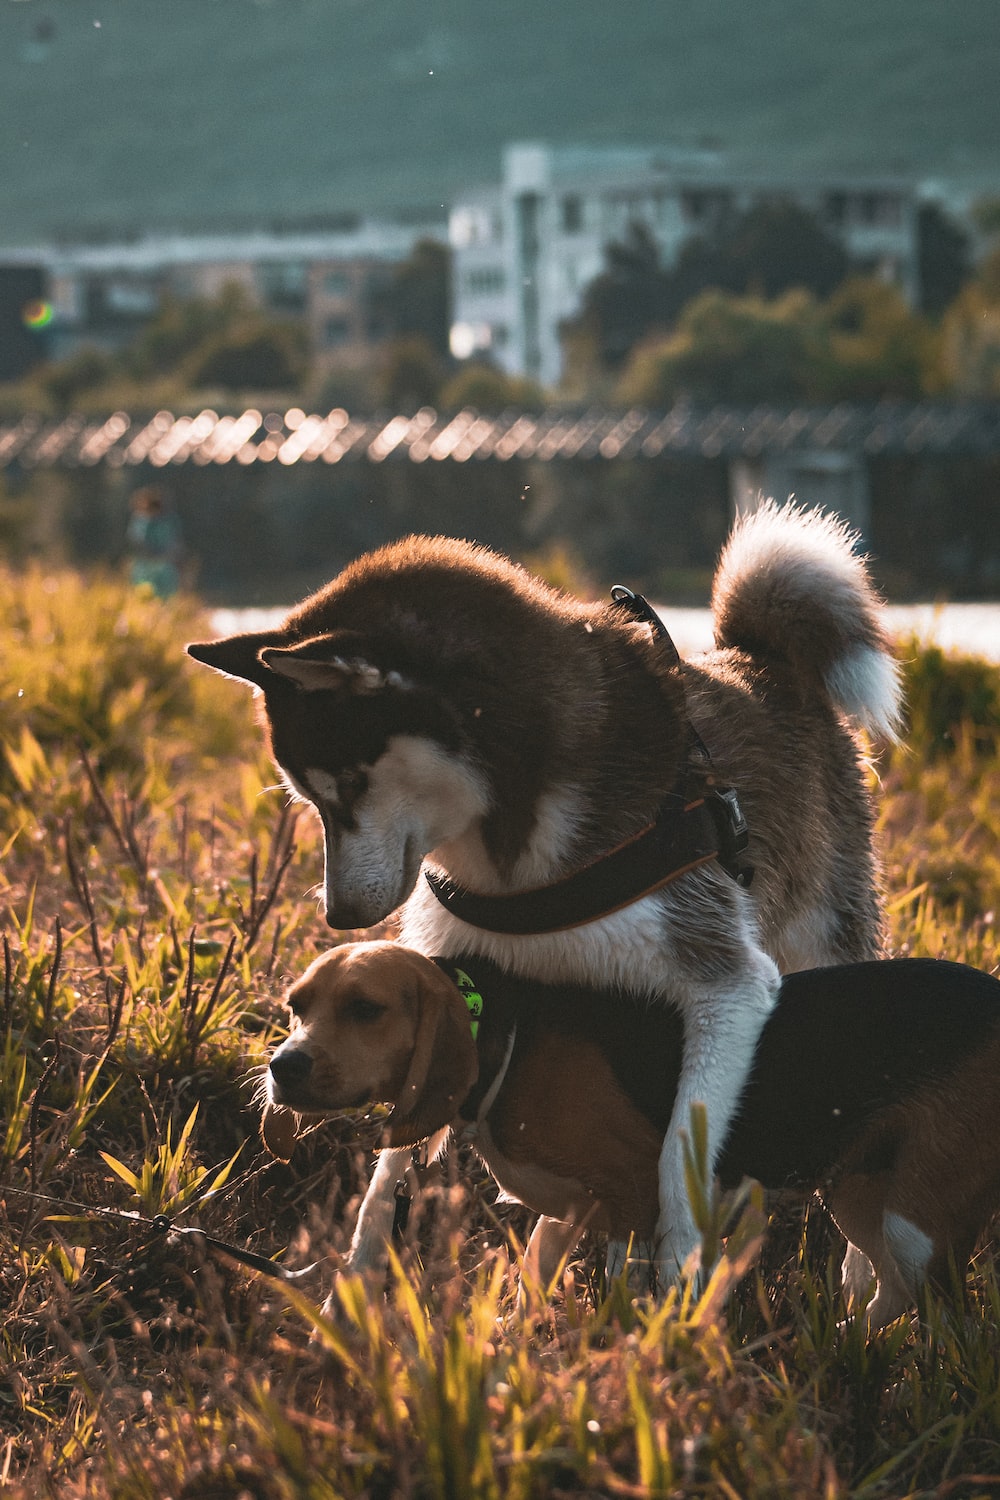 black and white siberian husky beside brown short coated dog on brown grass field during daytime